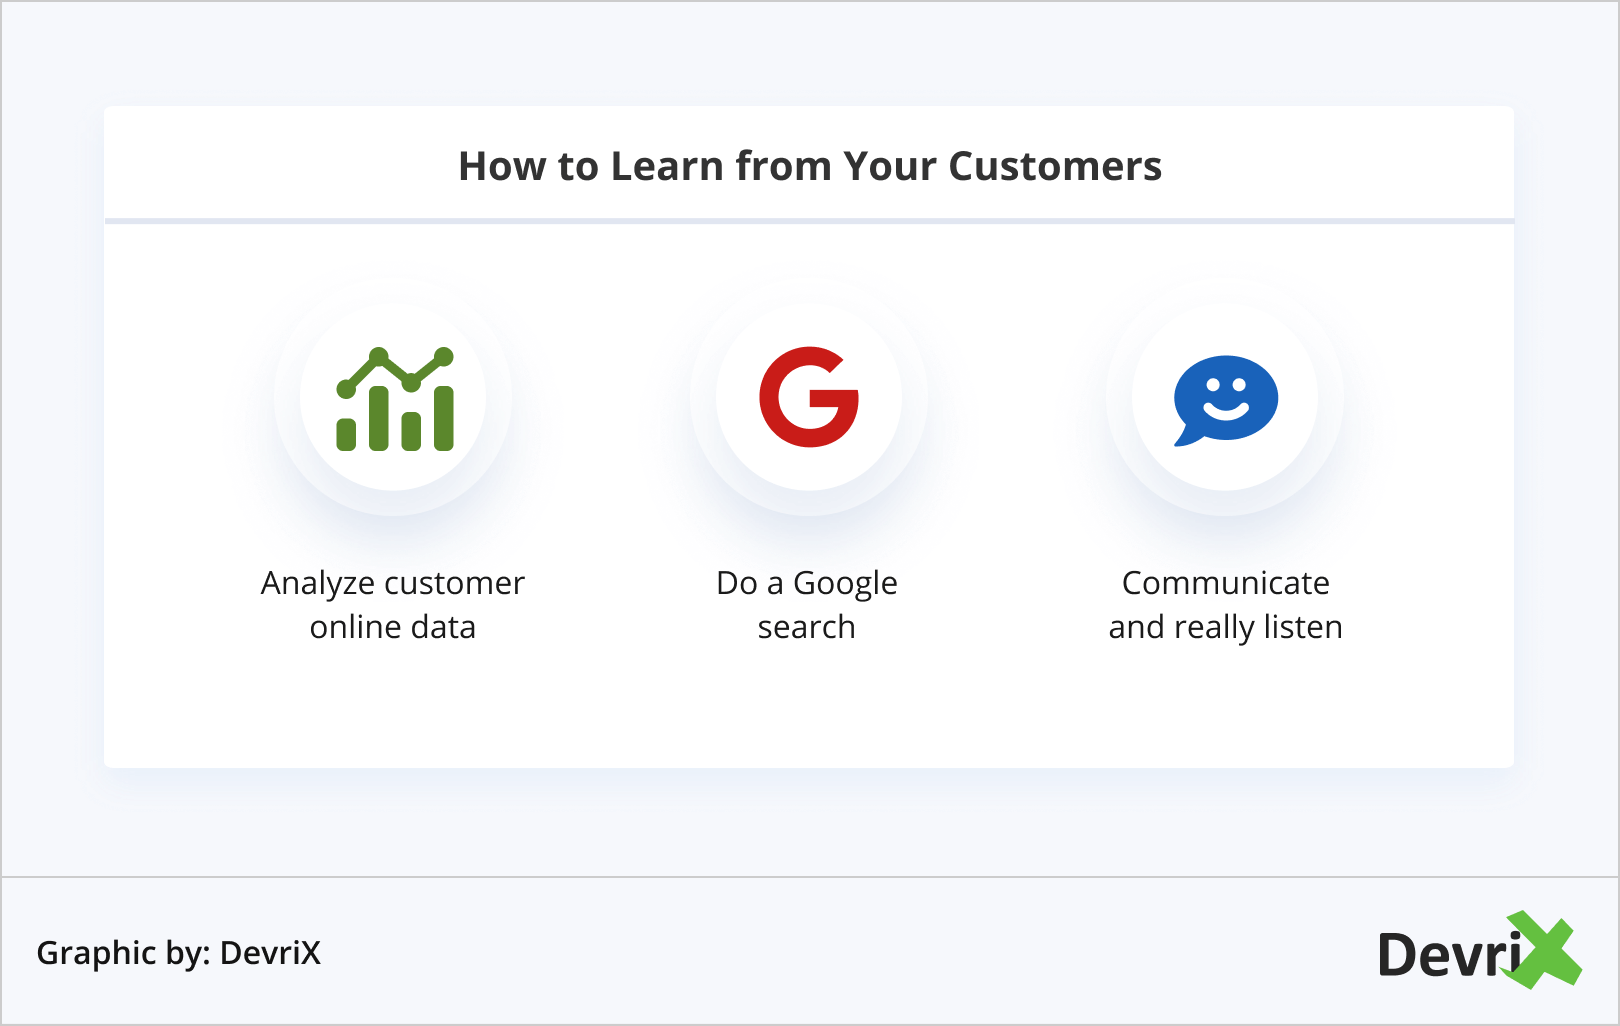 How to Learn from Your Customers